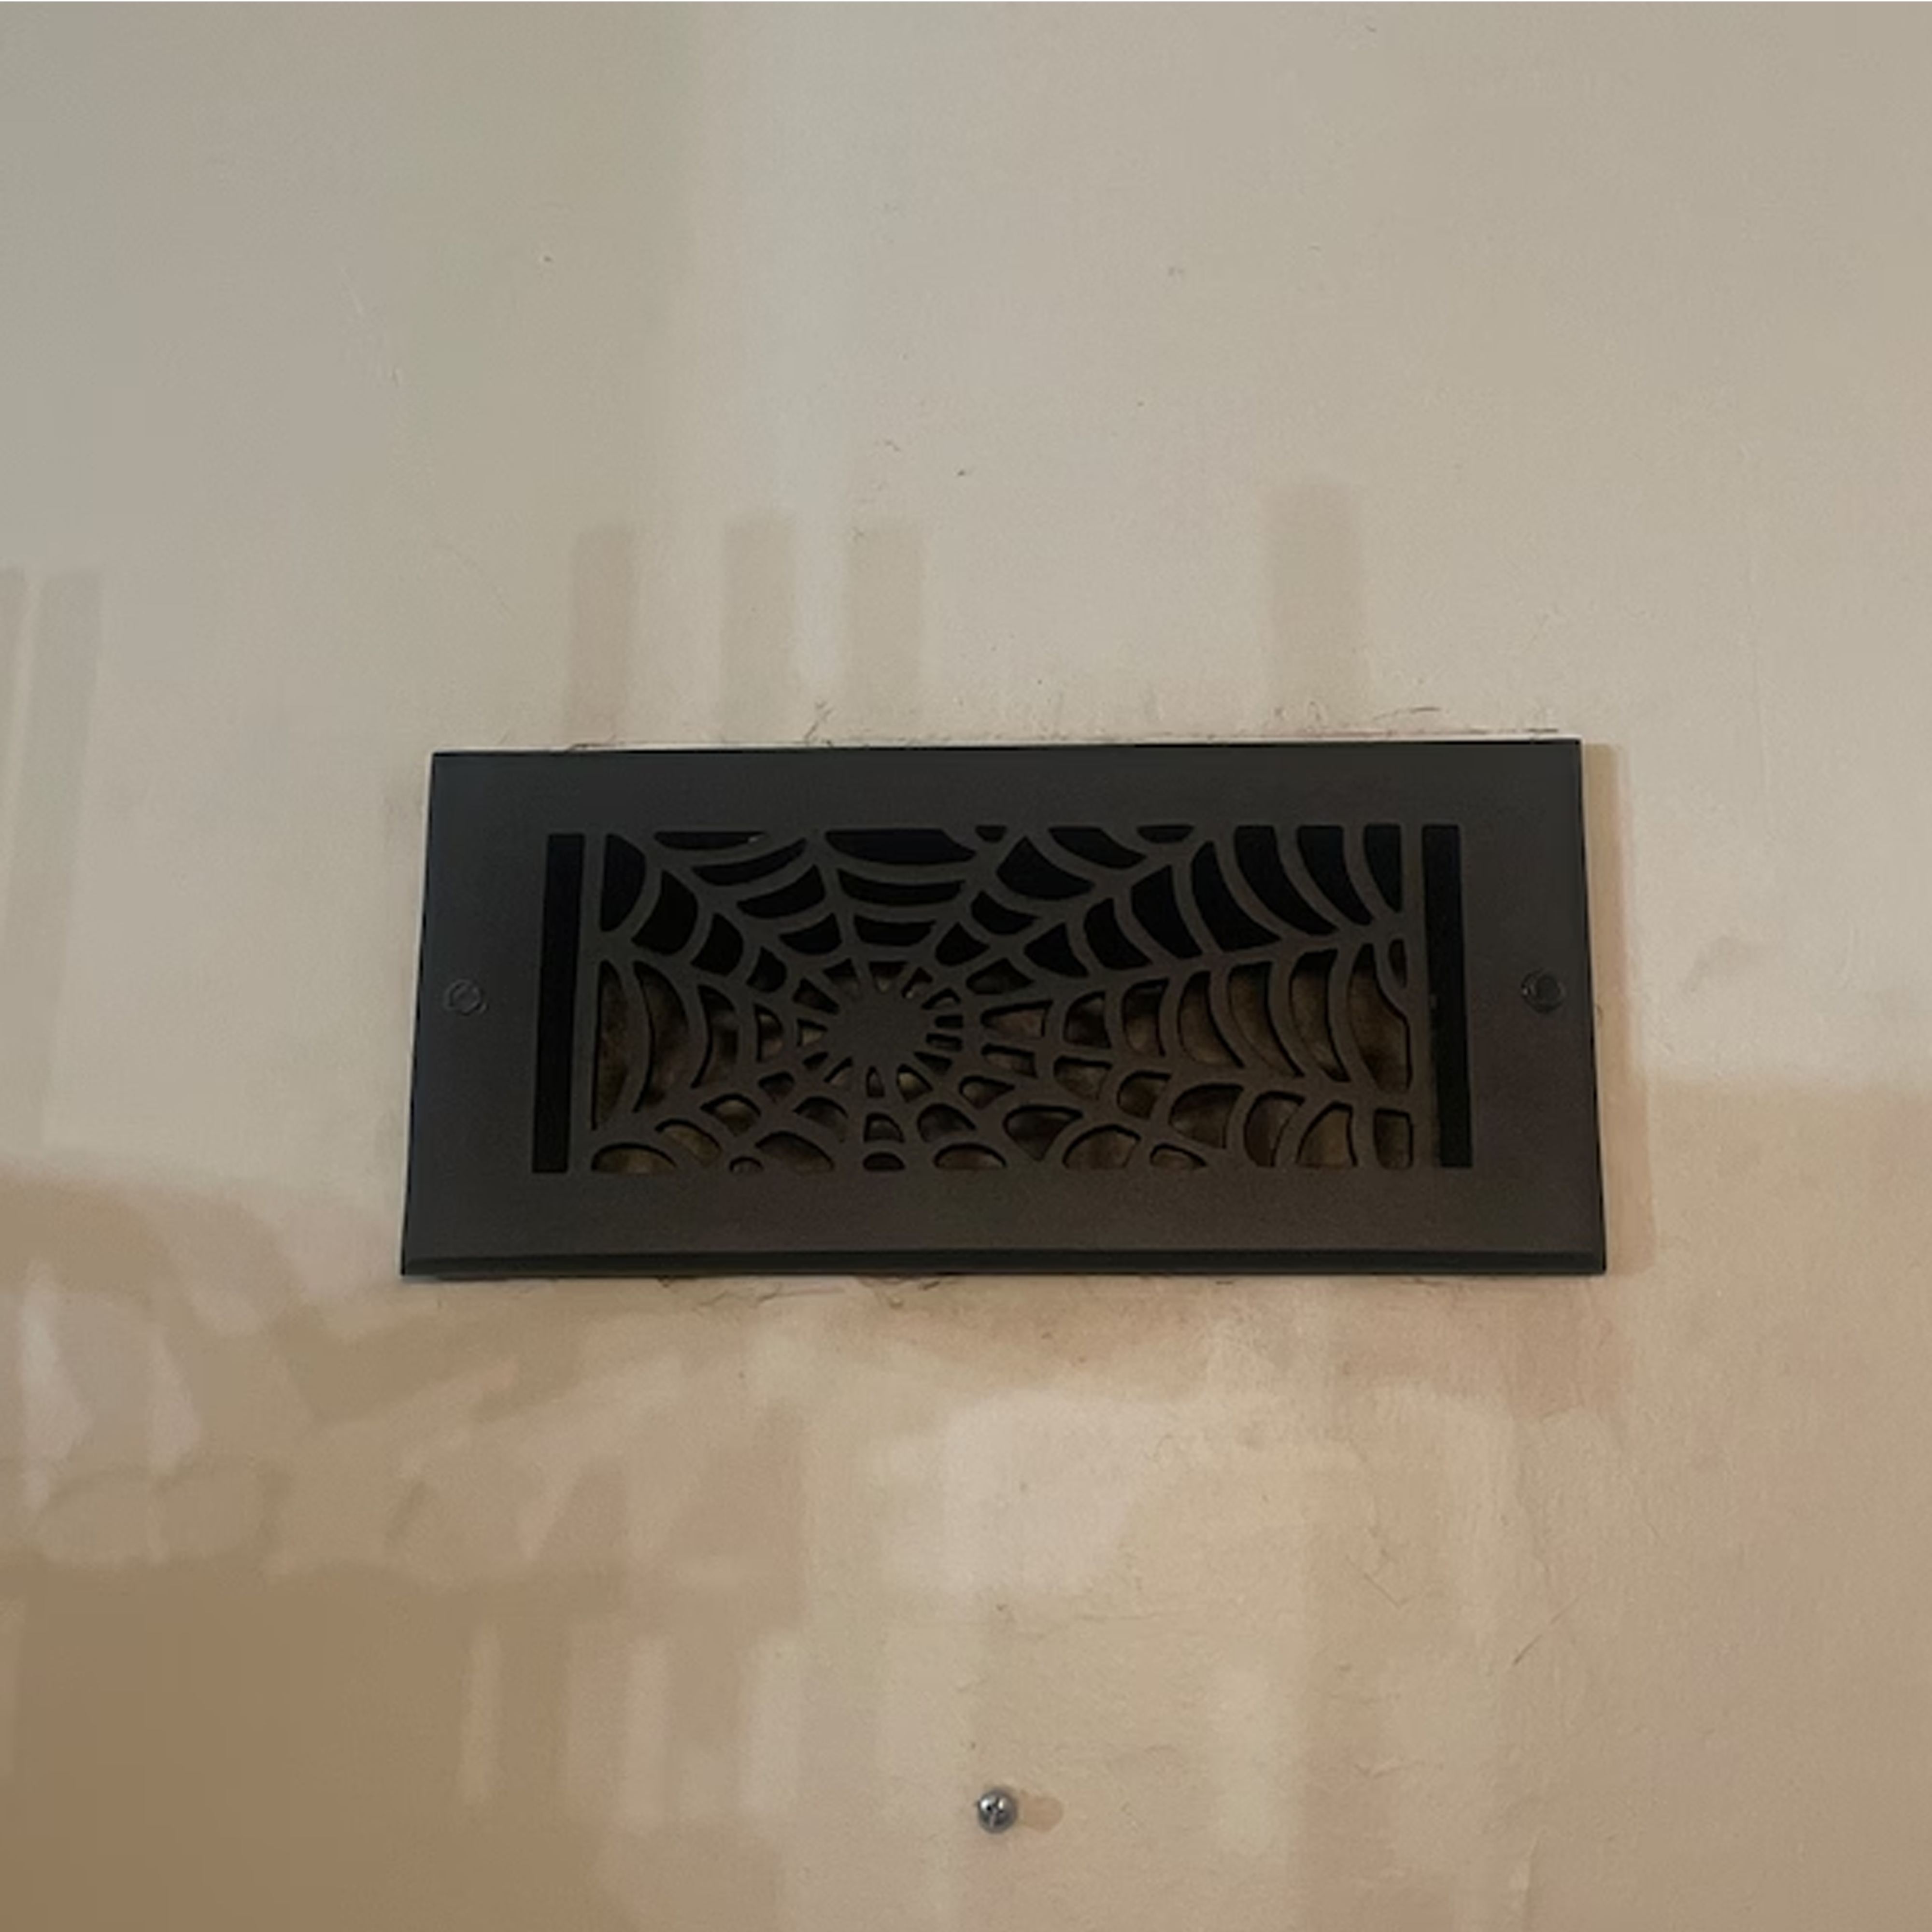 Spooky Gothic Vent cover 2"x 10" Duct Opening (Overall 3-1/2"x 11-3/4") in Spider Web Design | Solid Cast Aluminium Register Cover | Powder Coated